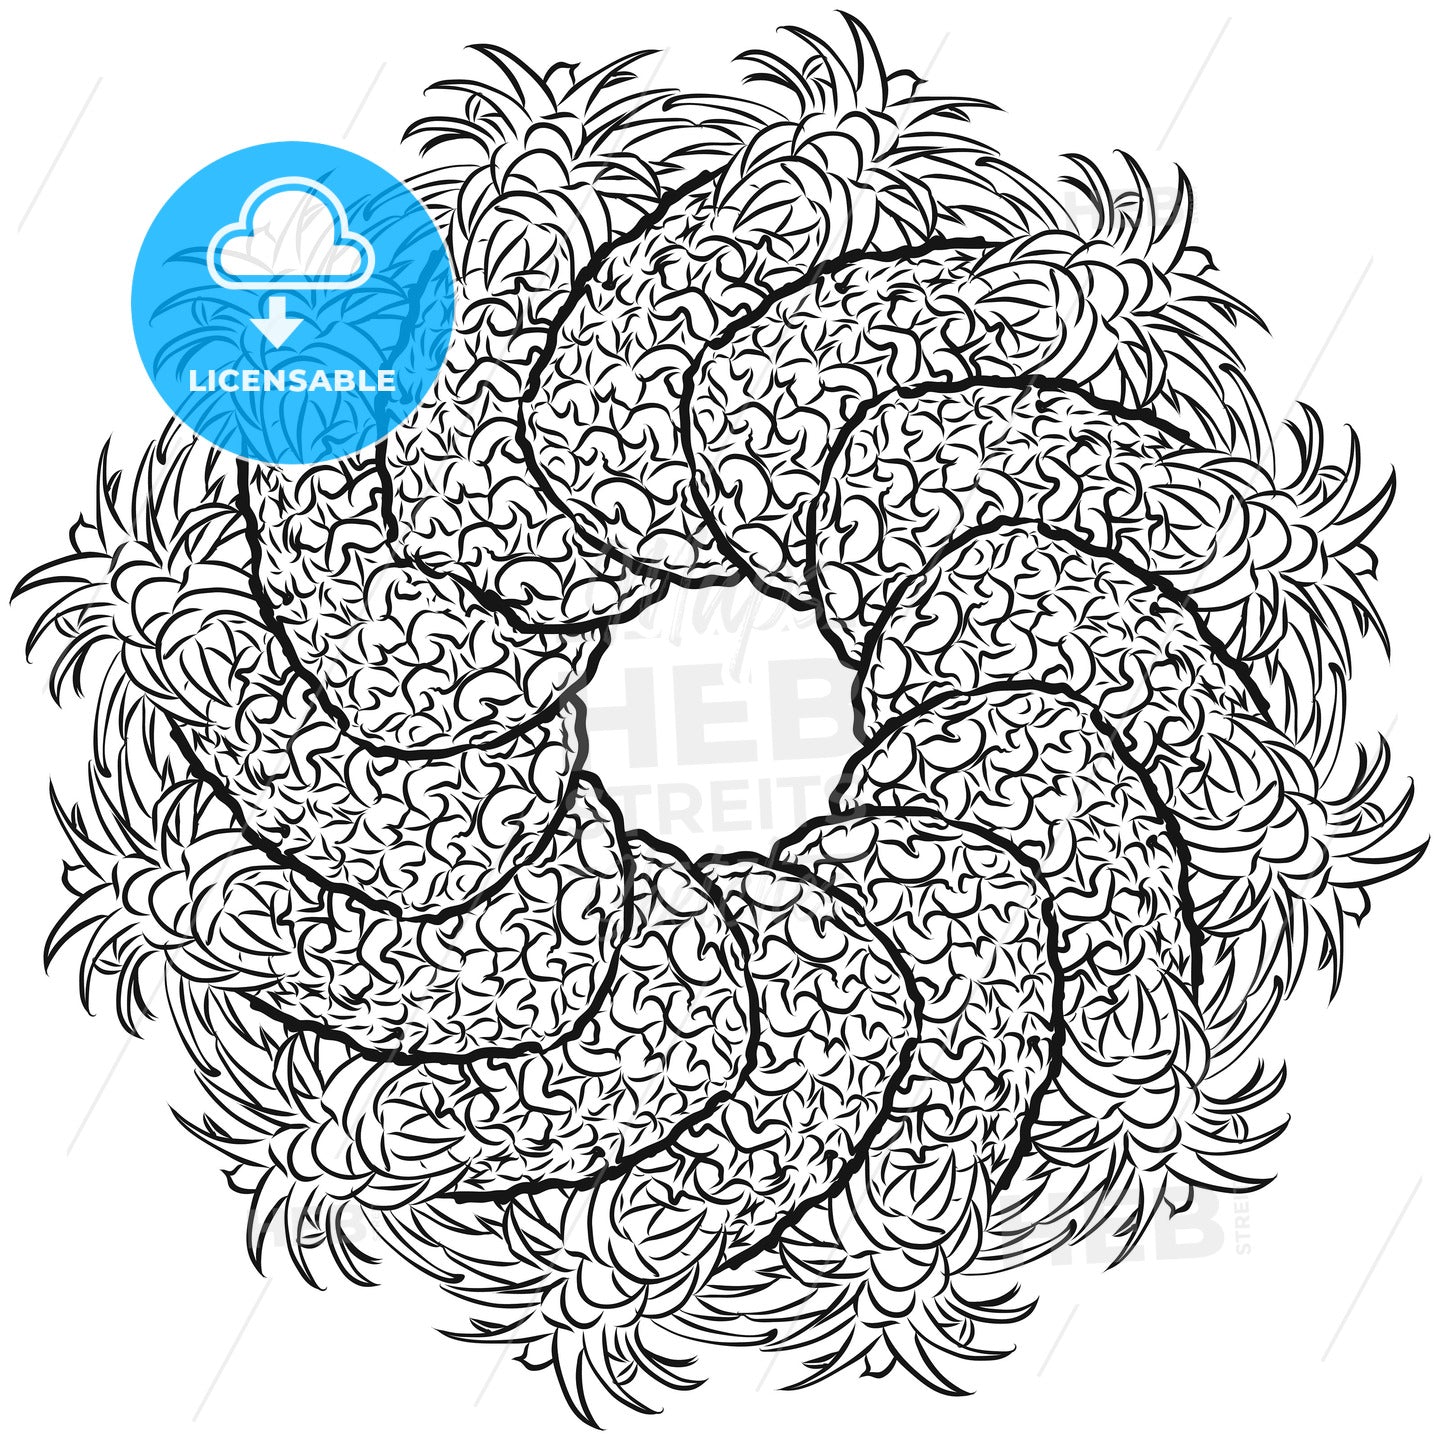 Outline sketch of pineapples arranged in a circle – instant download